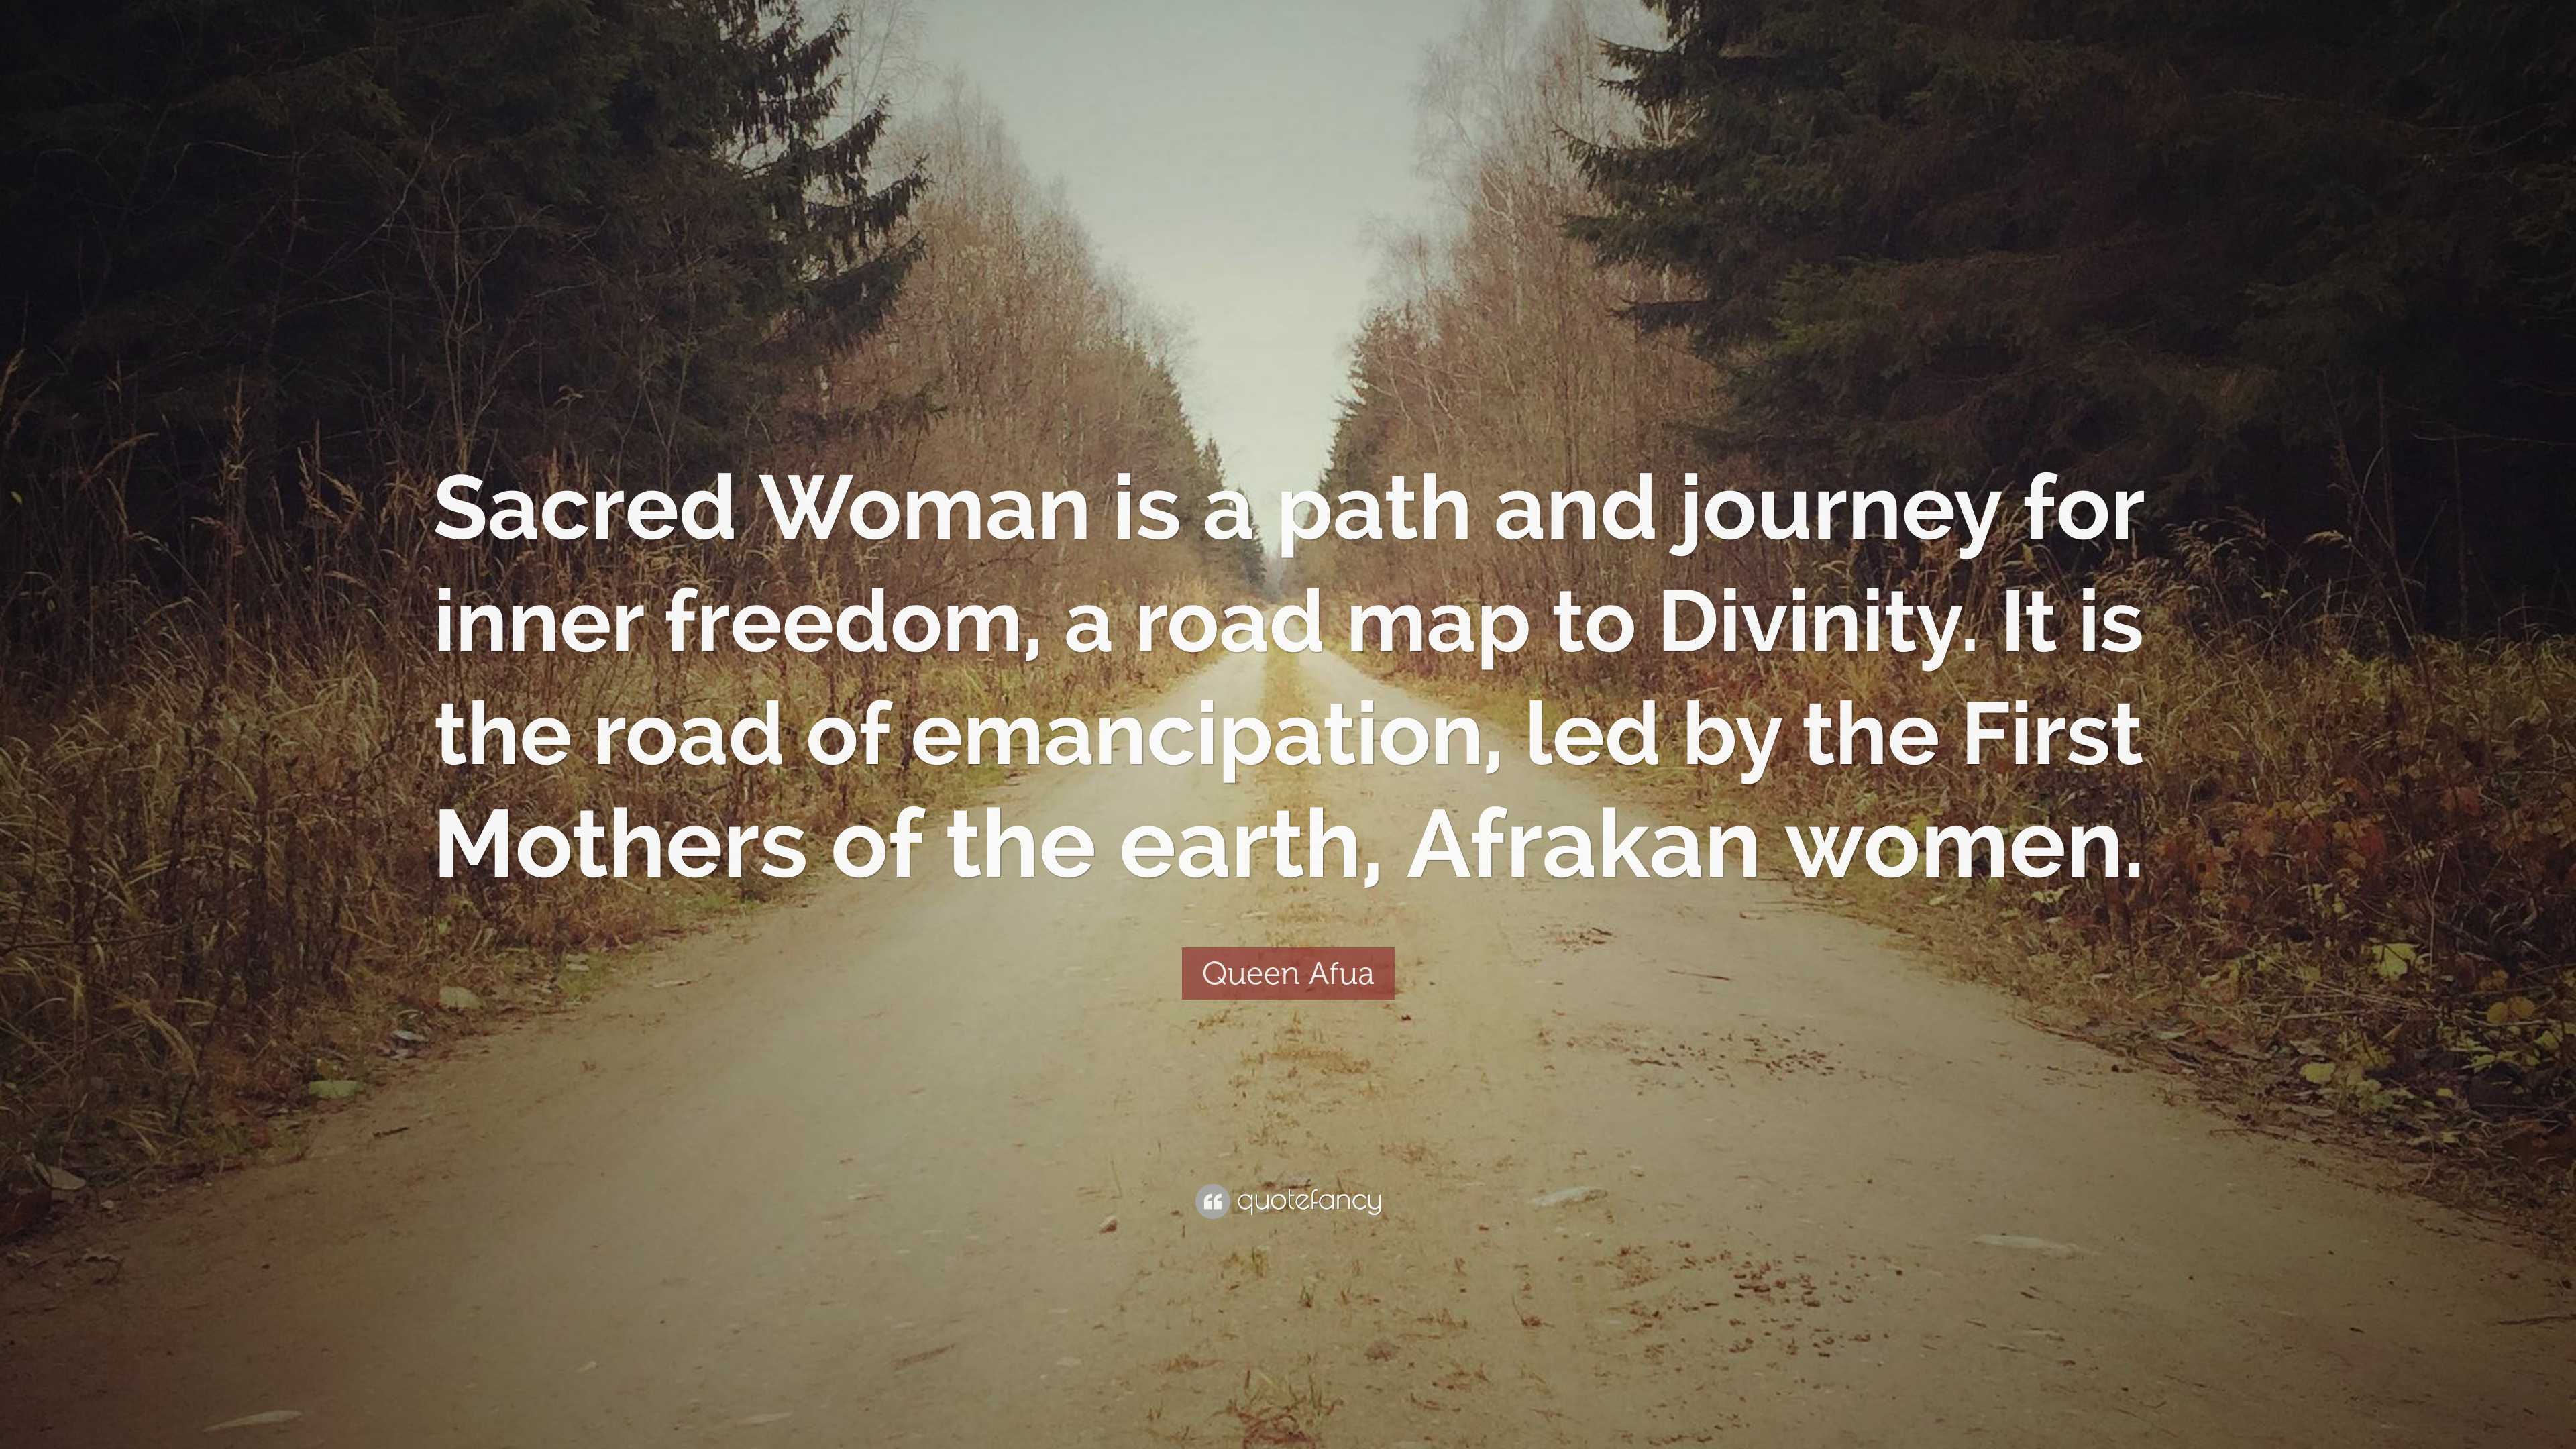 Queen Afua Quote: “Sacred Woman is a path and journey for inner freedom, a  road map to Divinity. It is the road of emancipation, led by the”